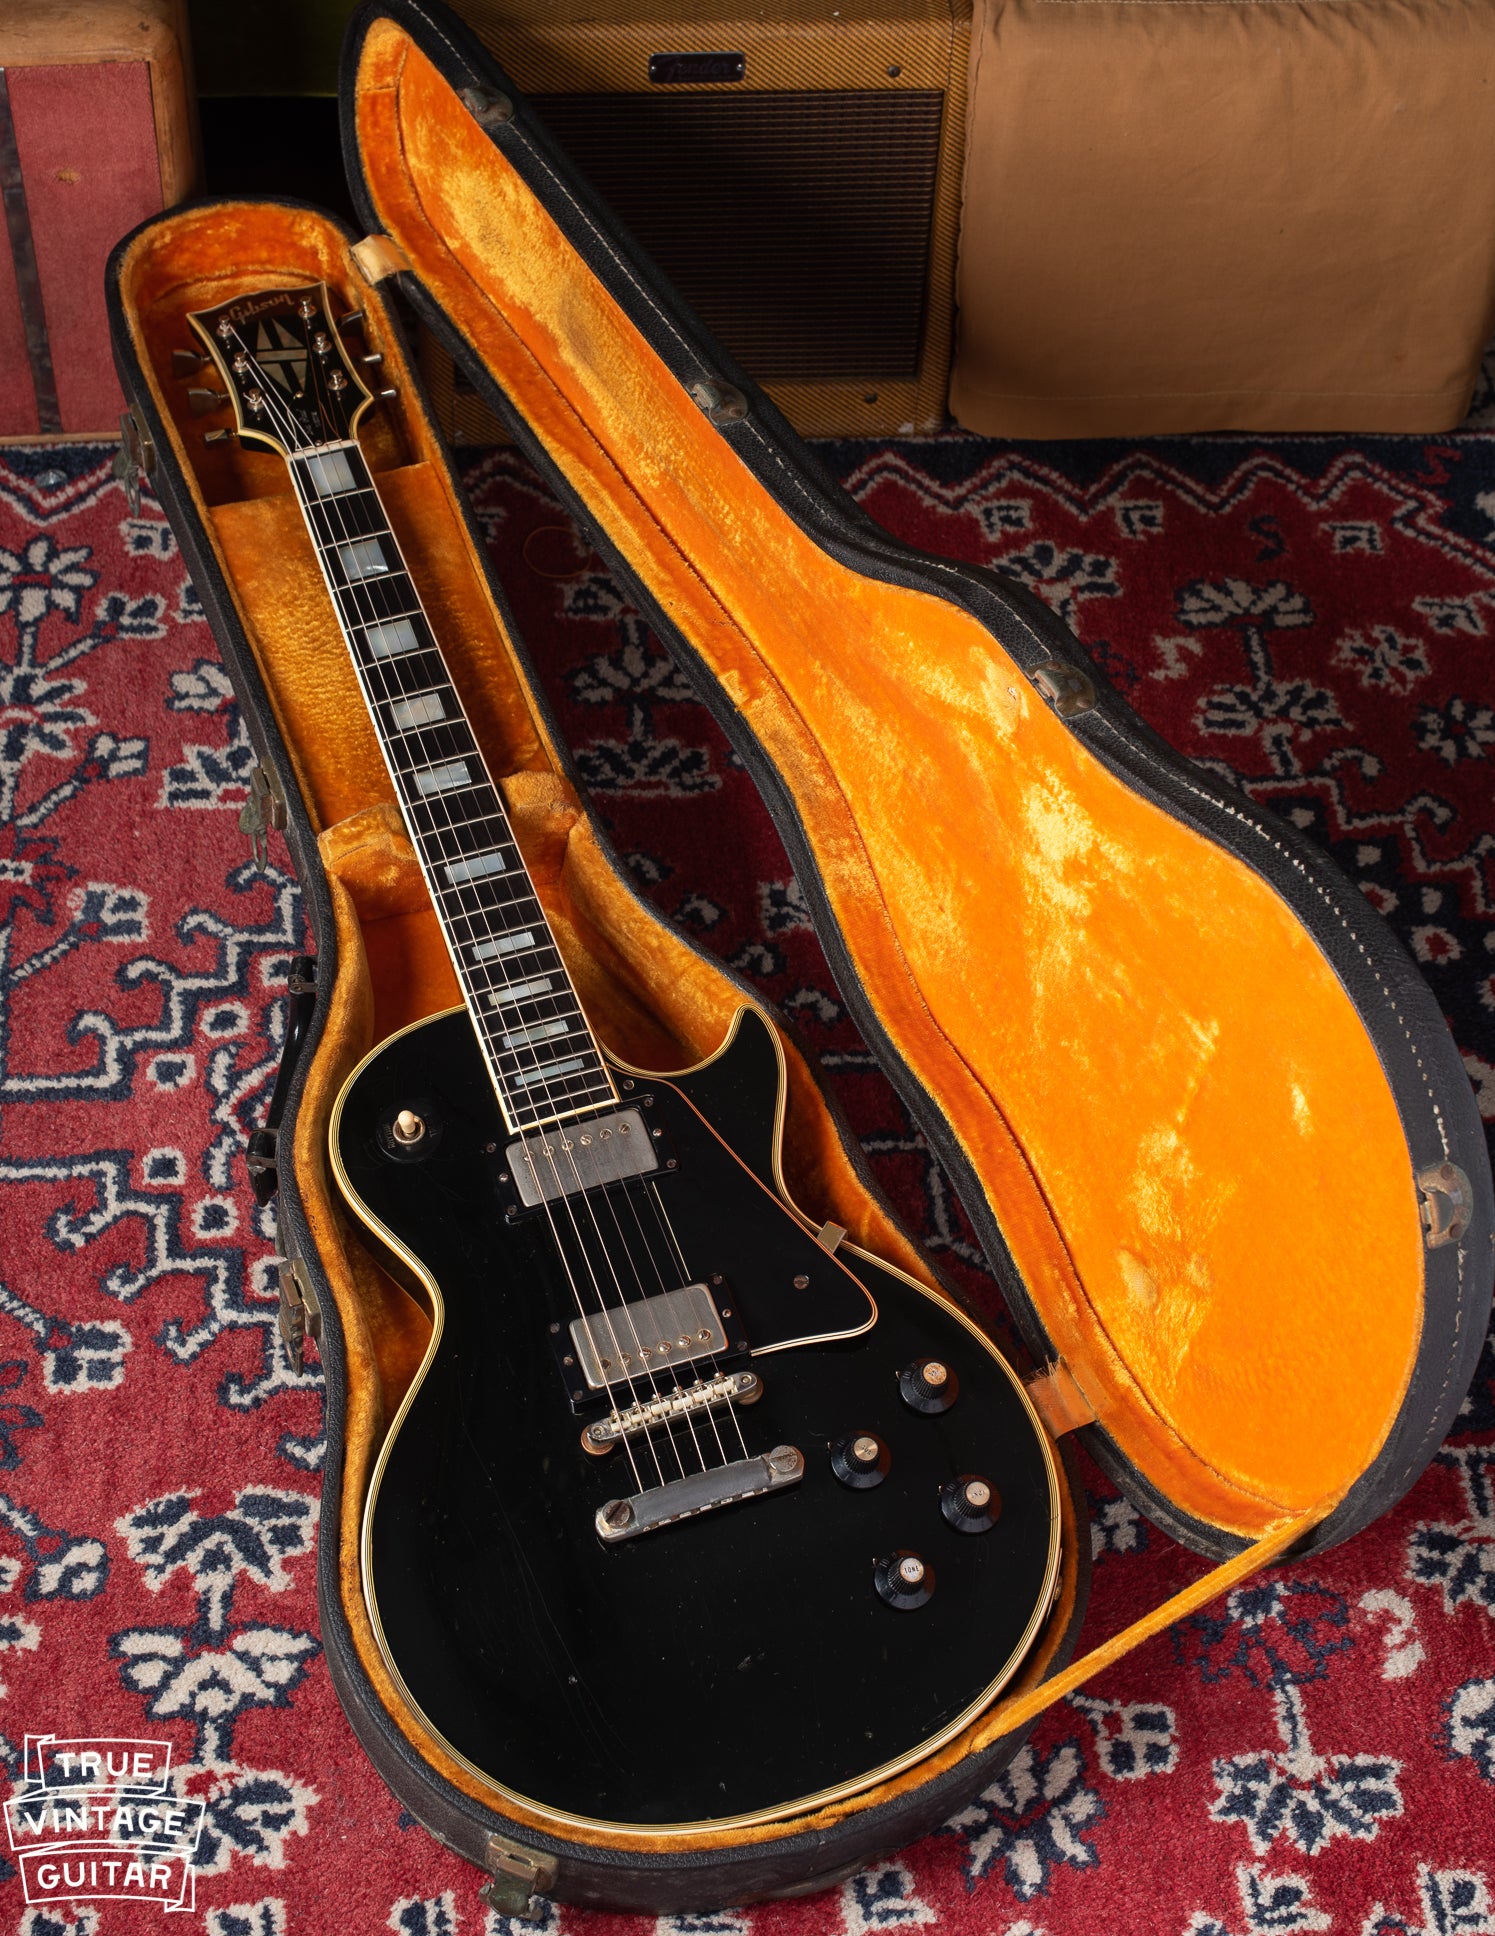 1969 Gibson Les Paul Custom black with gold hardware in yellow and black case.